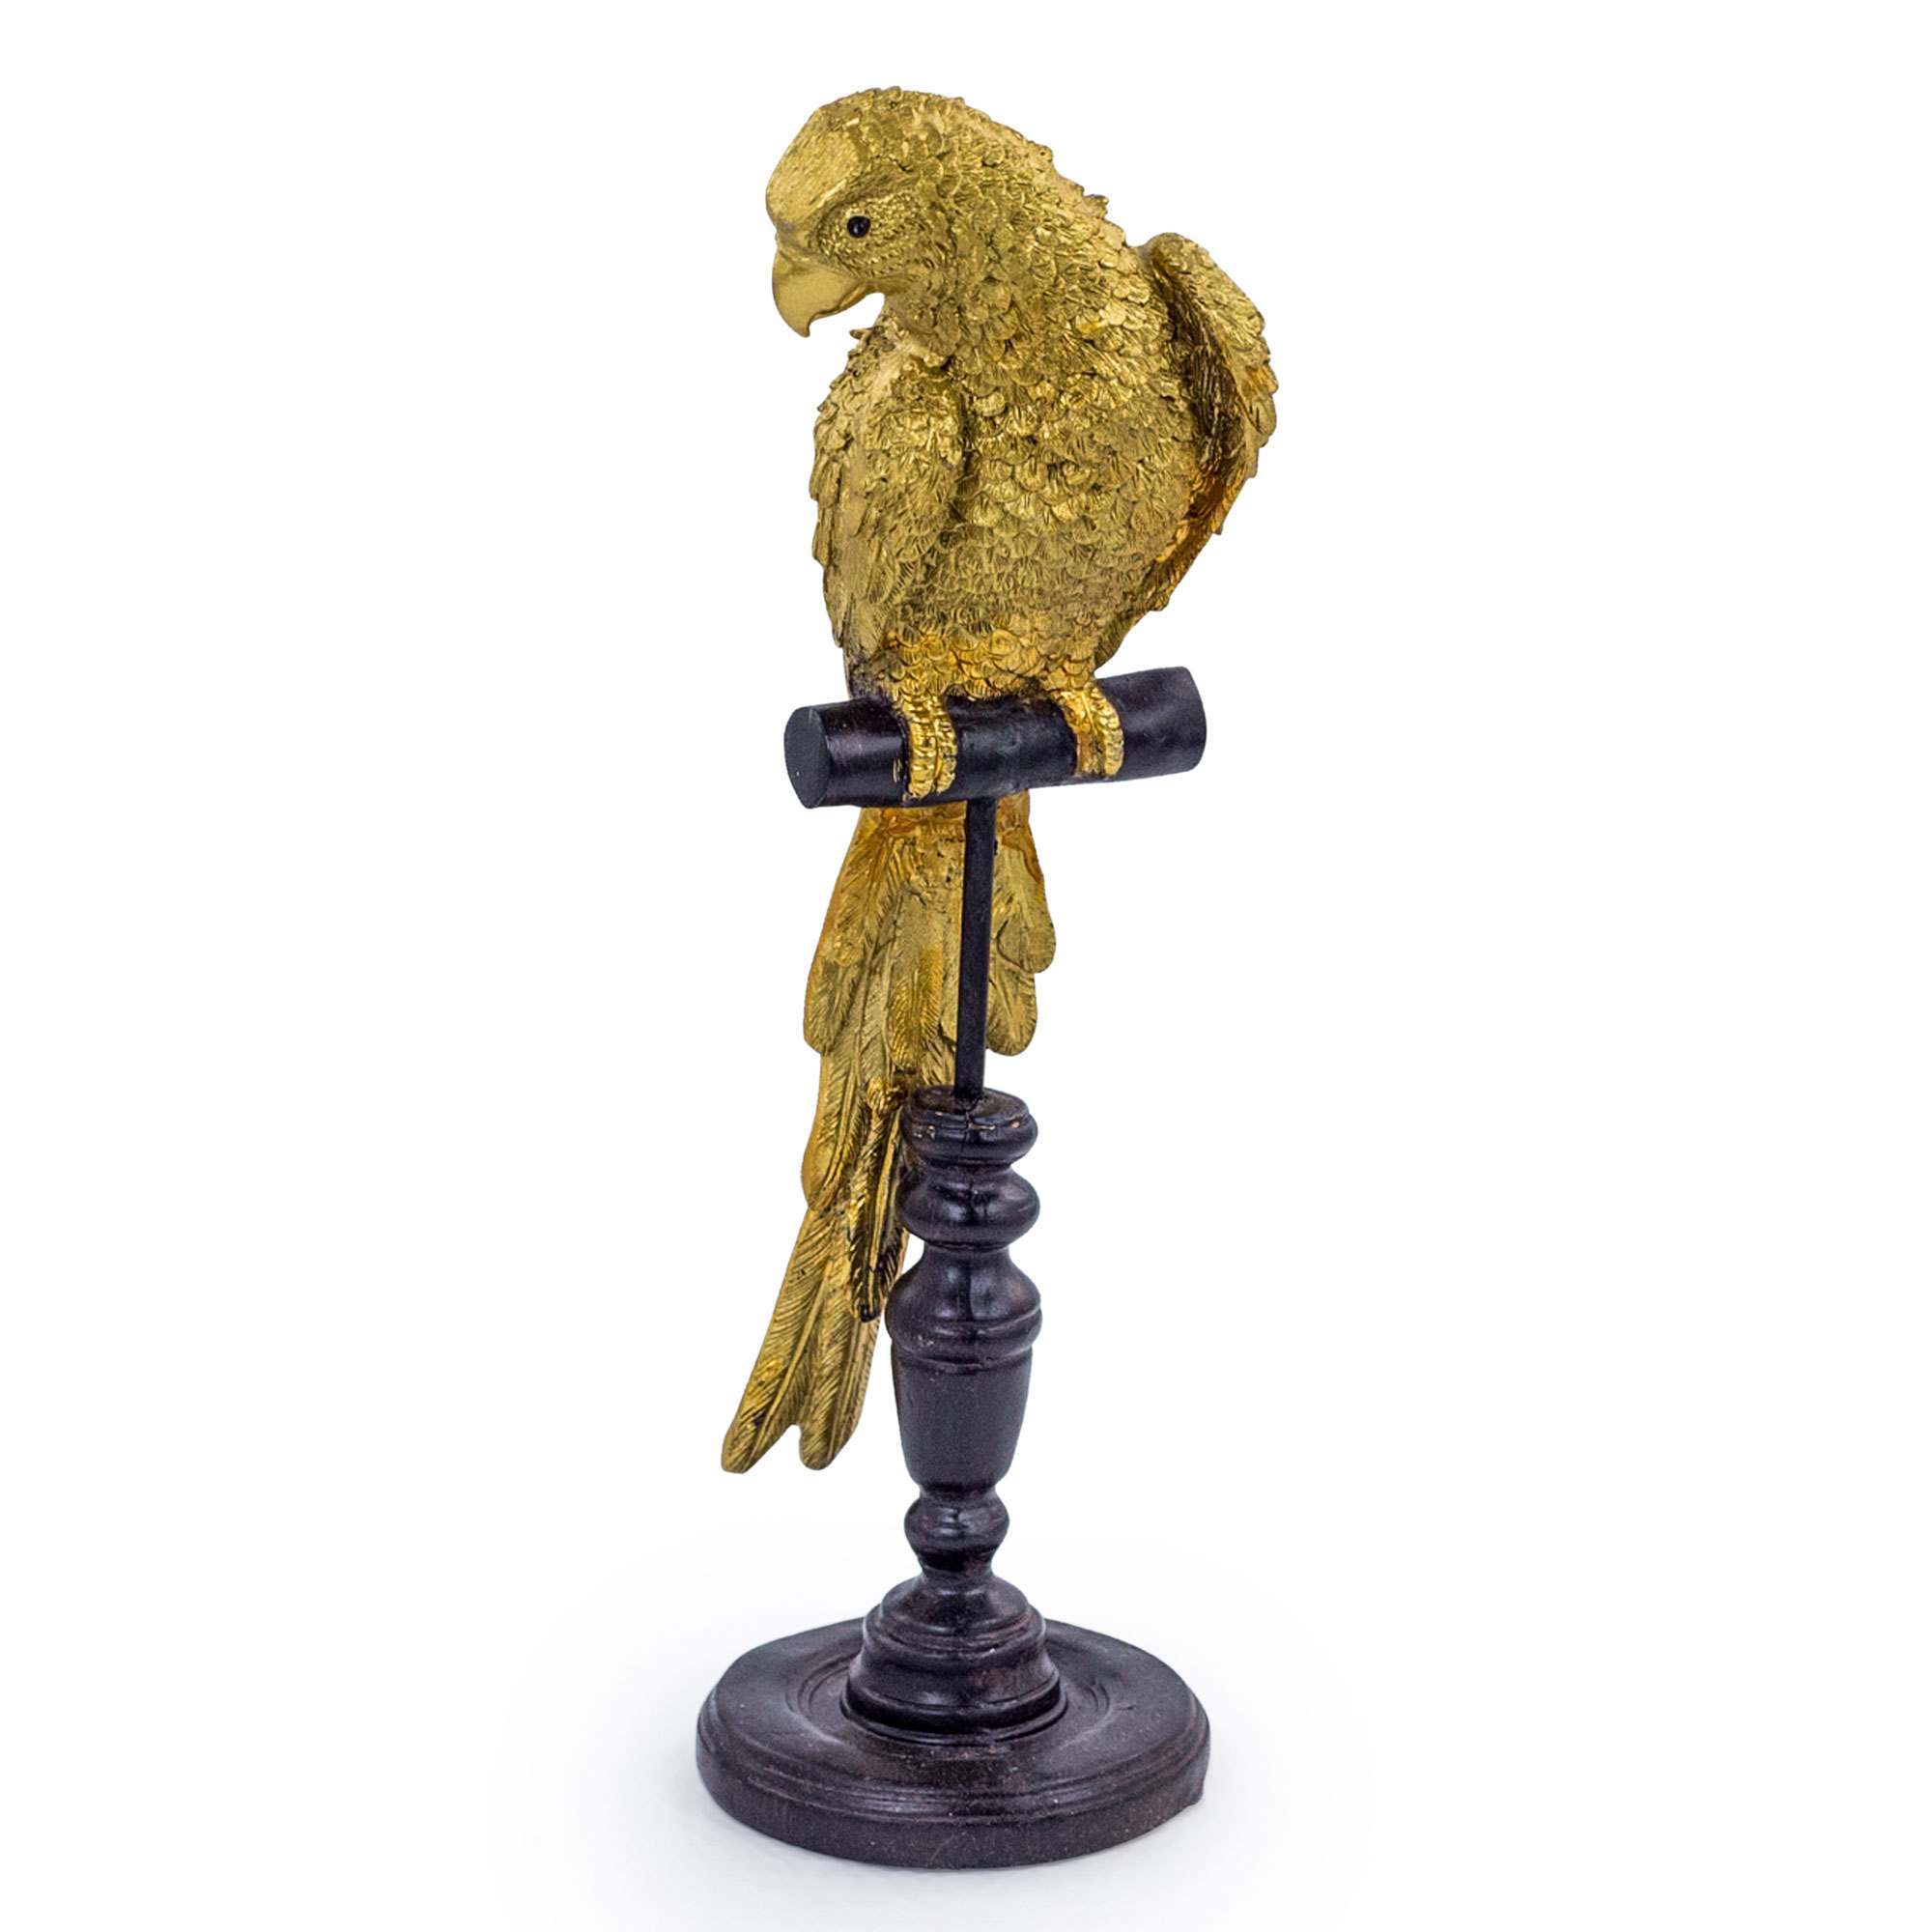 An image of Gold Parrot on Perch